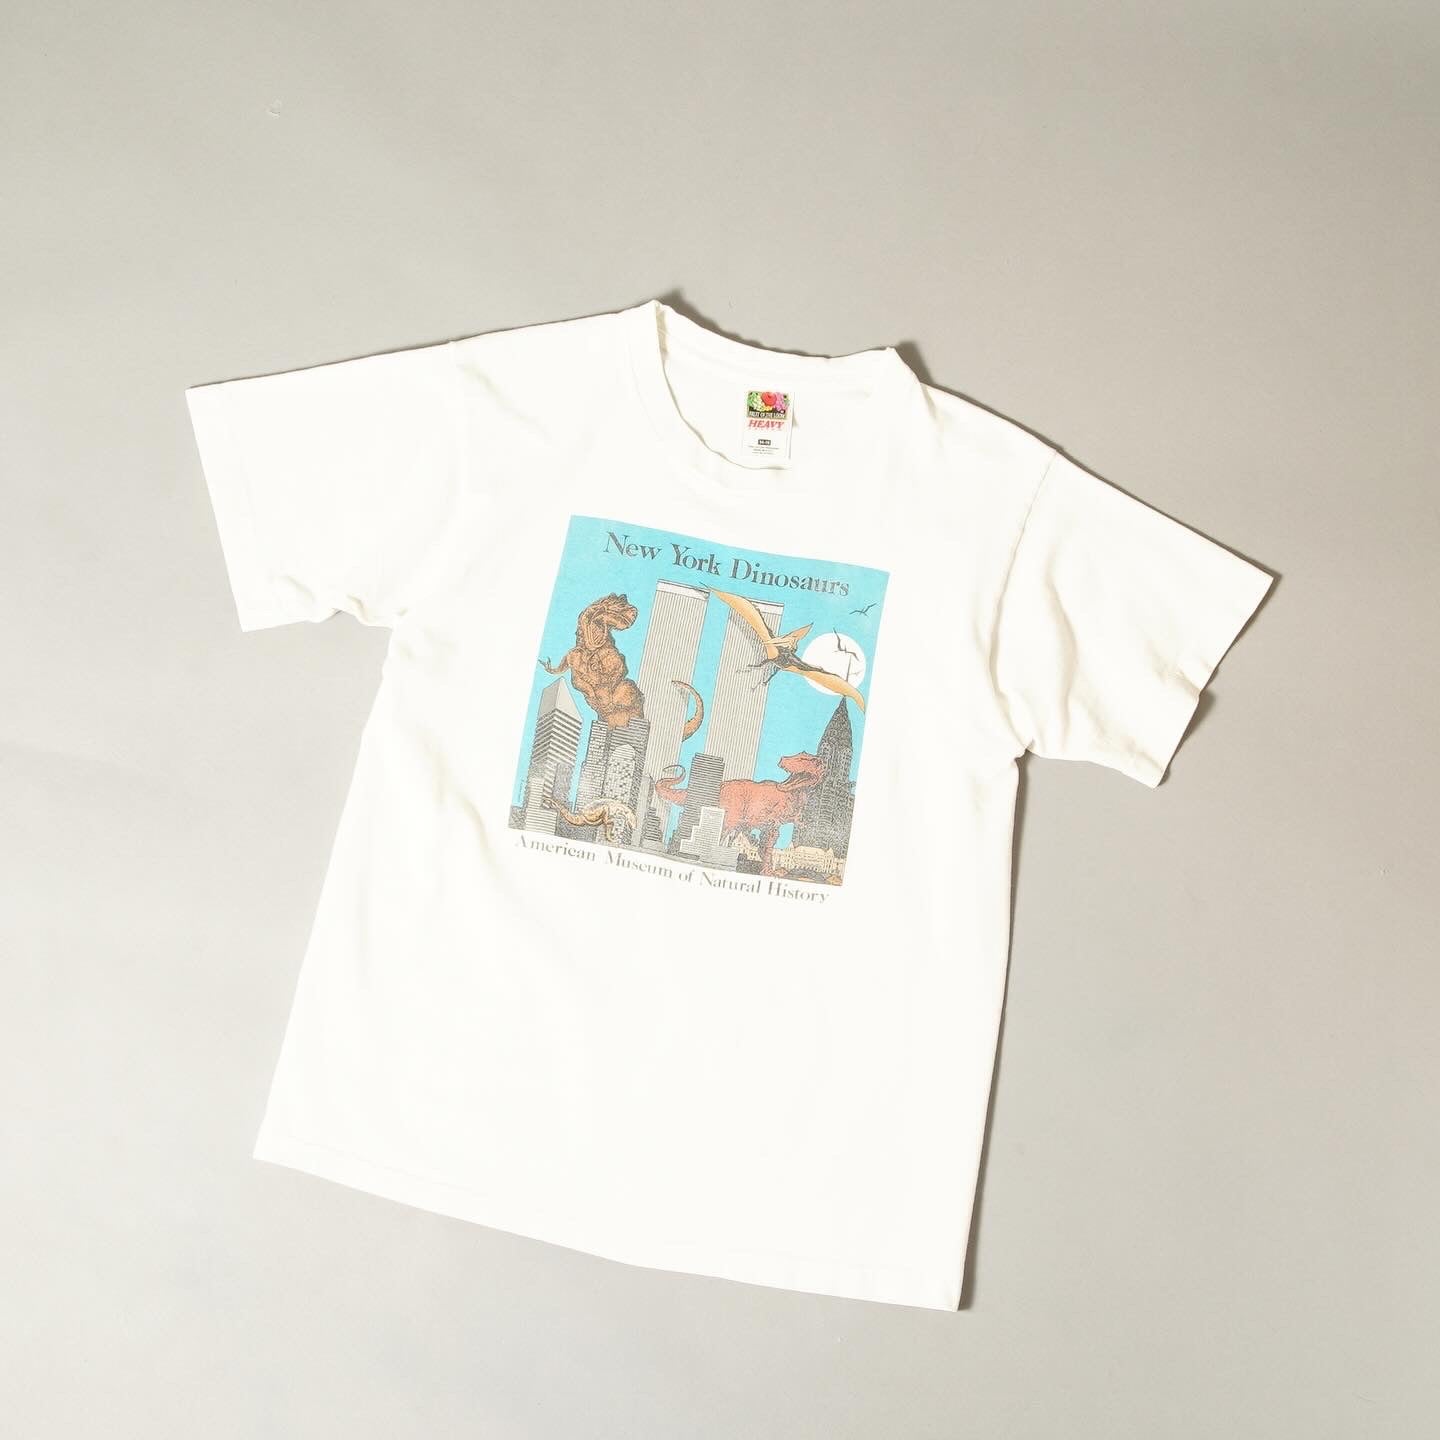 New York Dinosaurs “American Museum of Natural History” S/S Tee